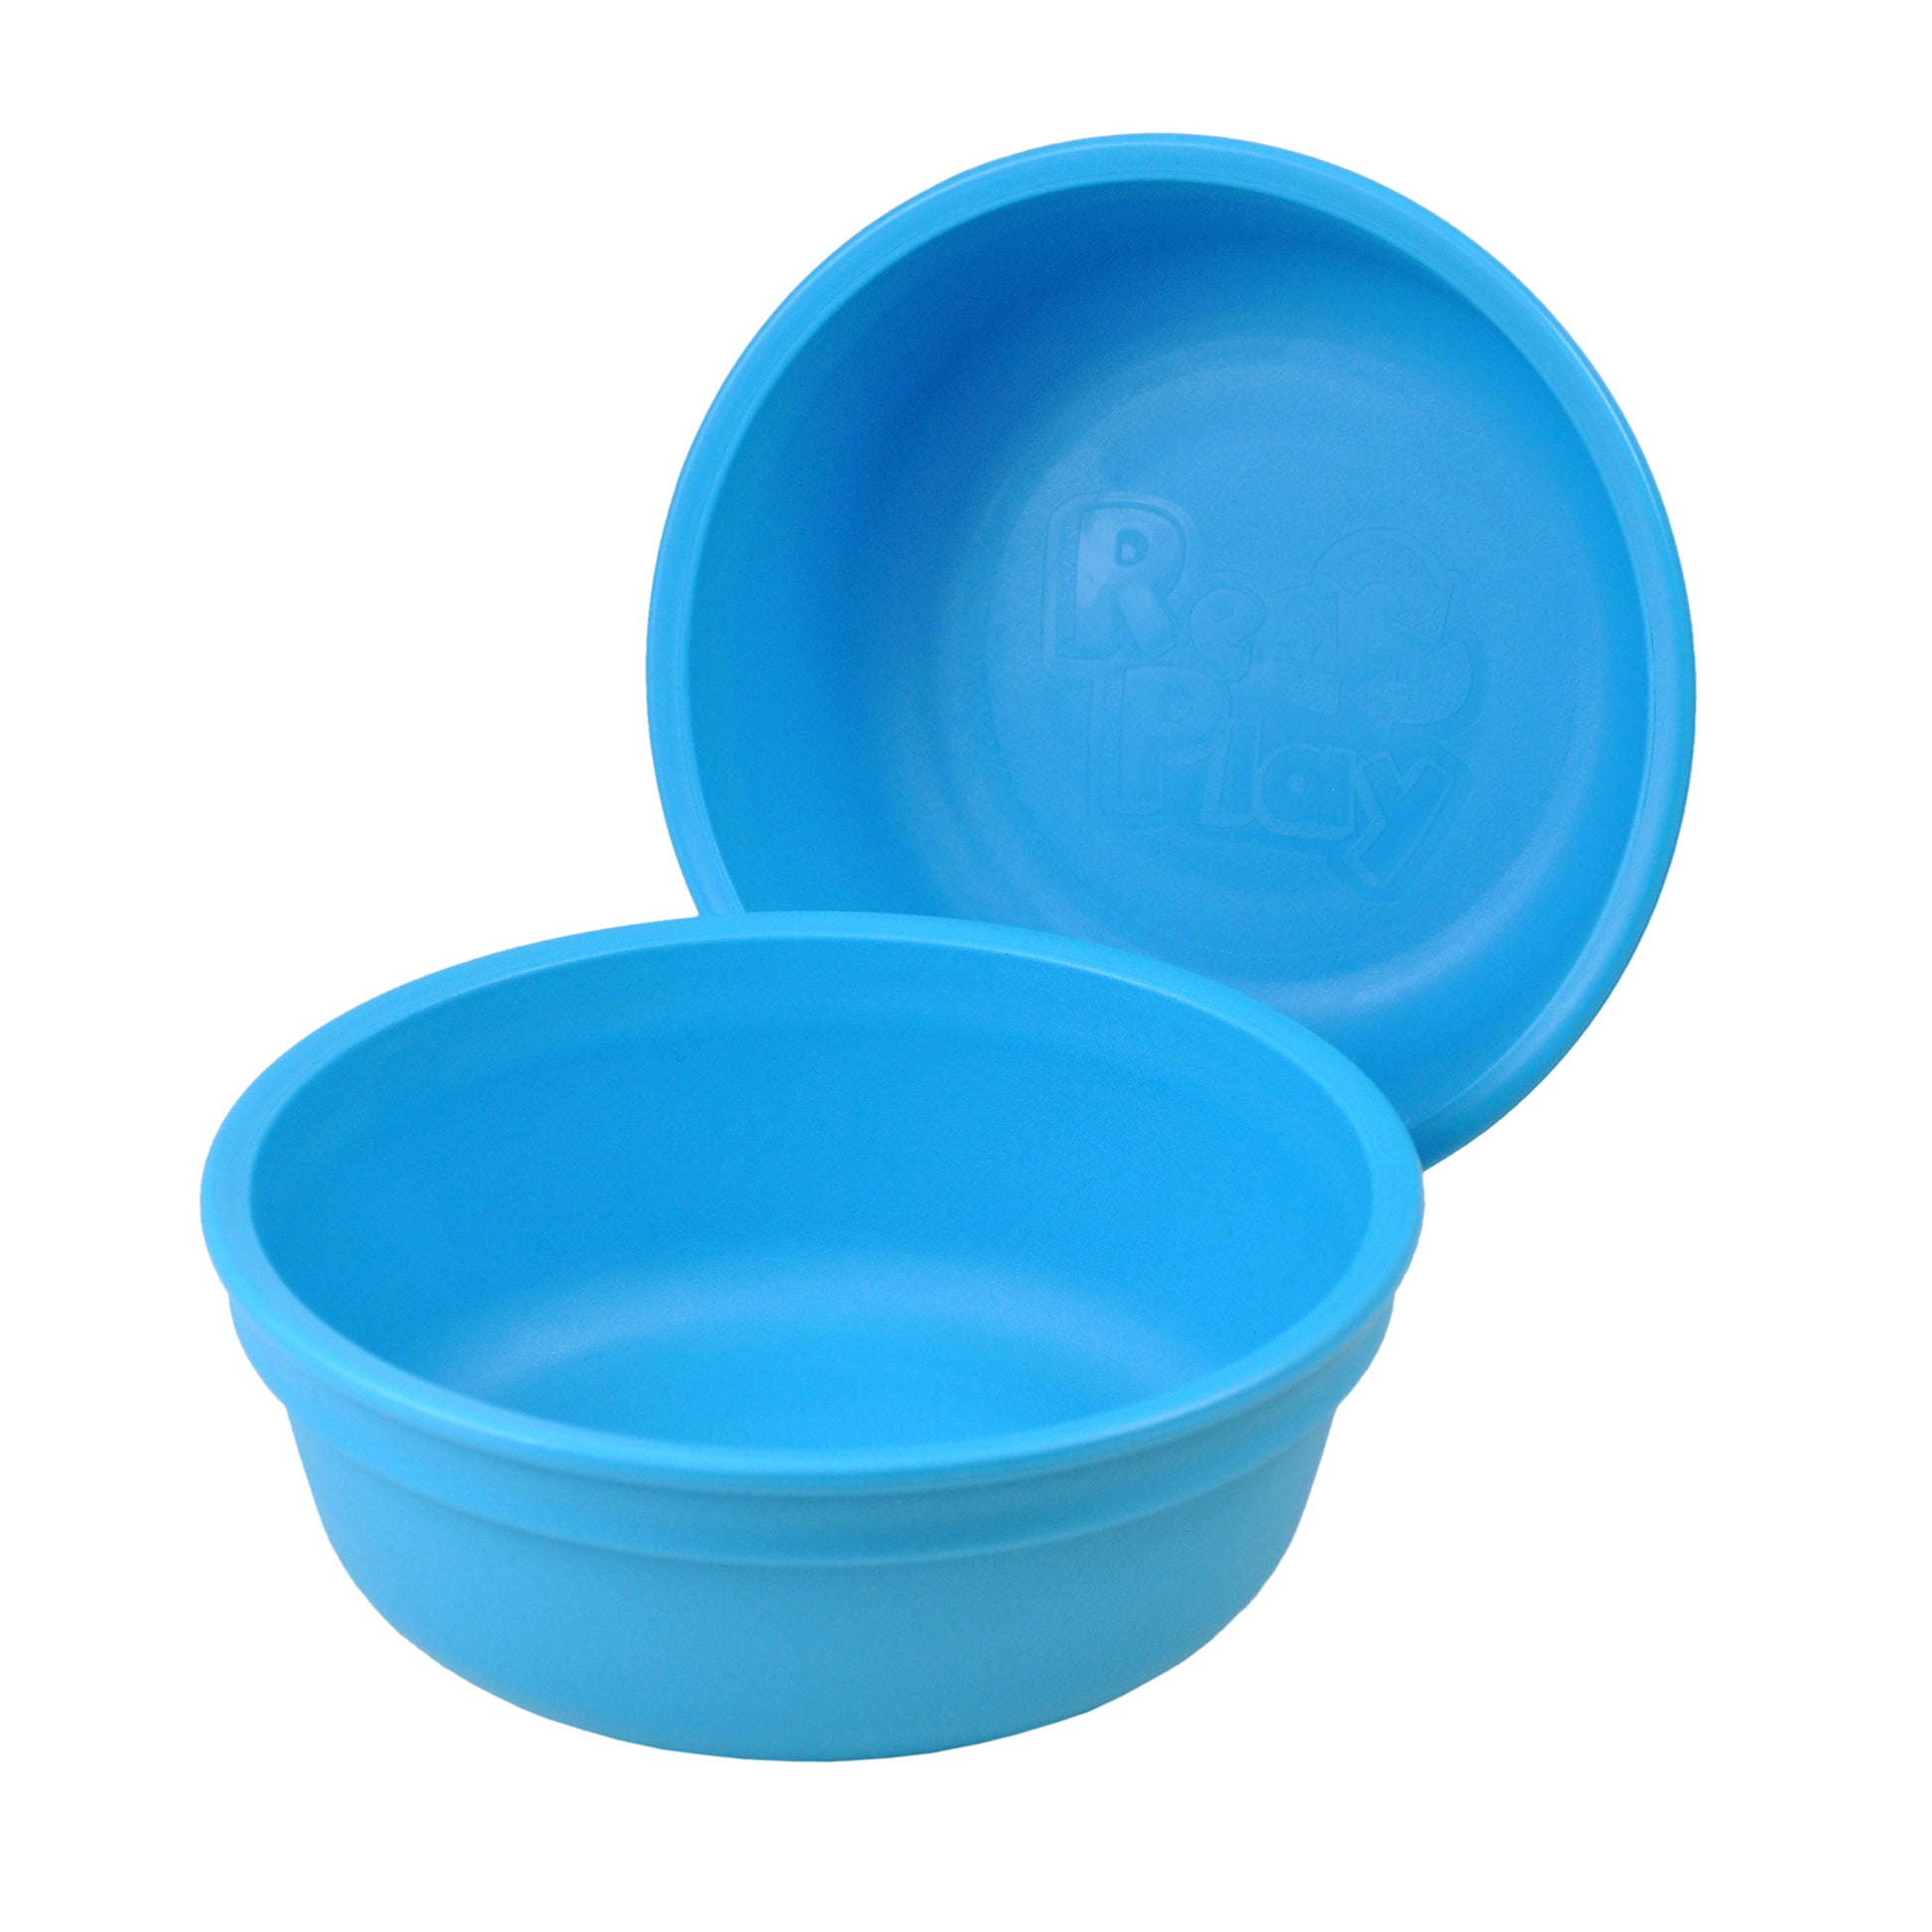 Re-Play Bowl | Standard Size in Sky Blue from Bear & Moo